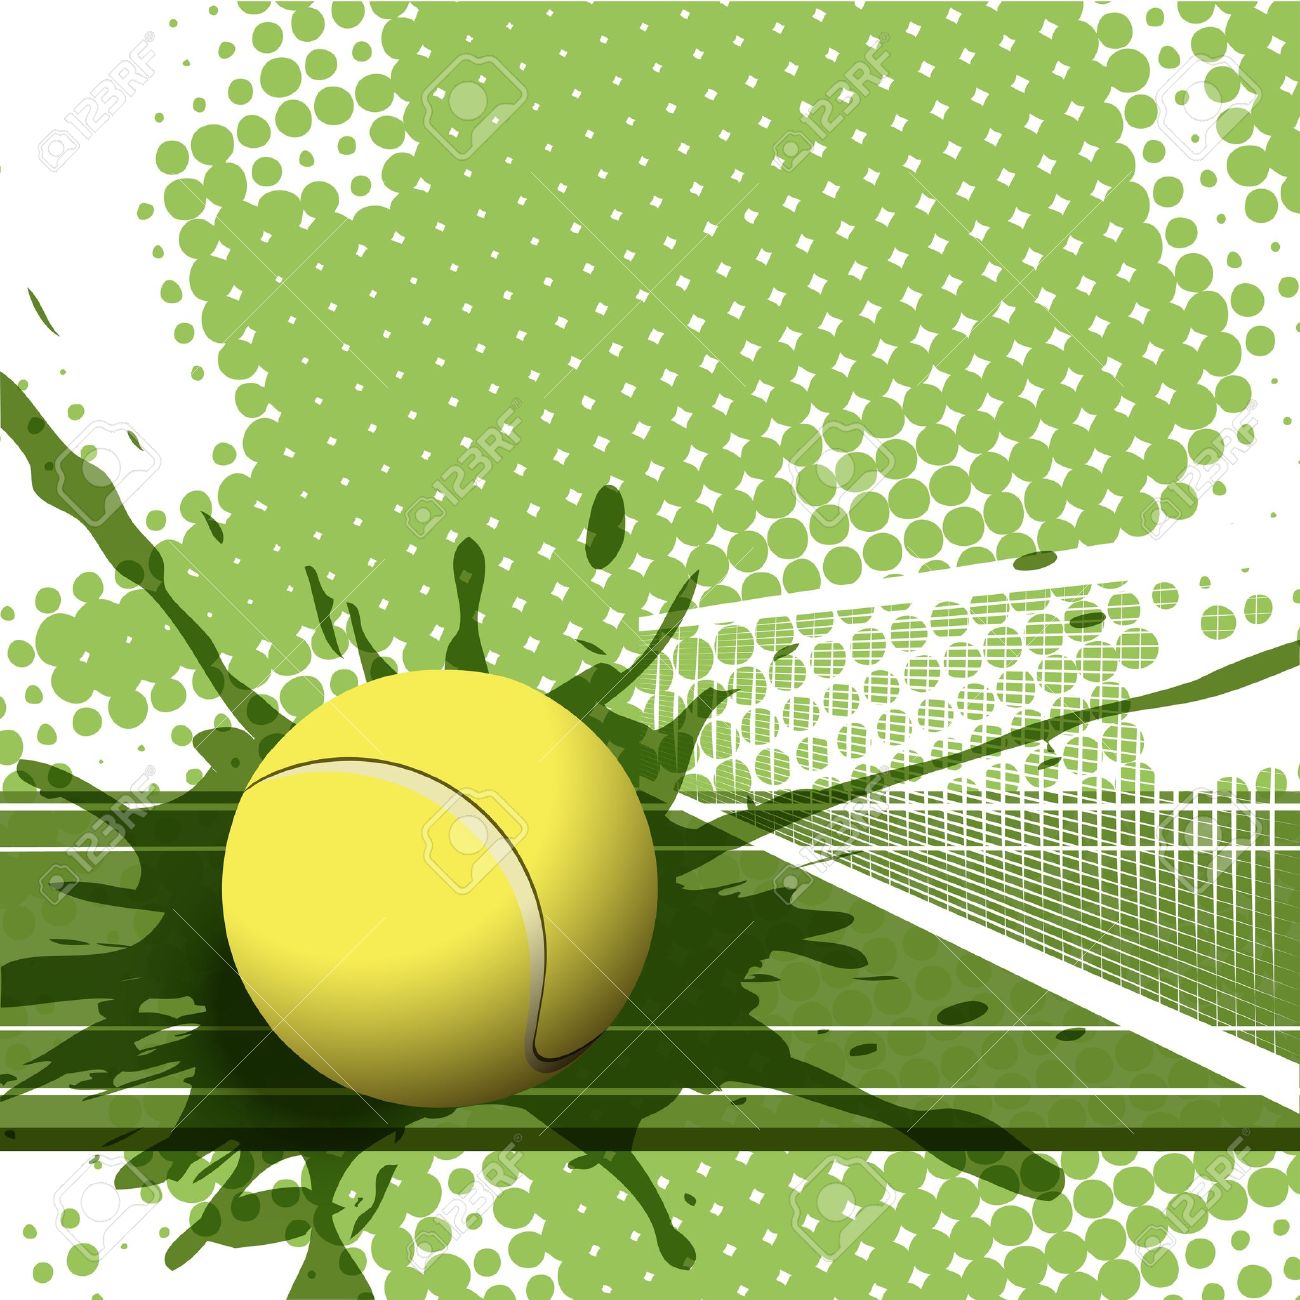 tennis: illustration tennis ball on abstract green background